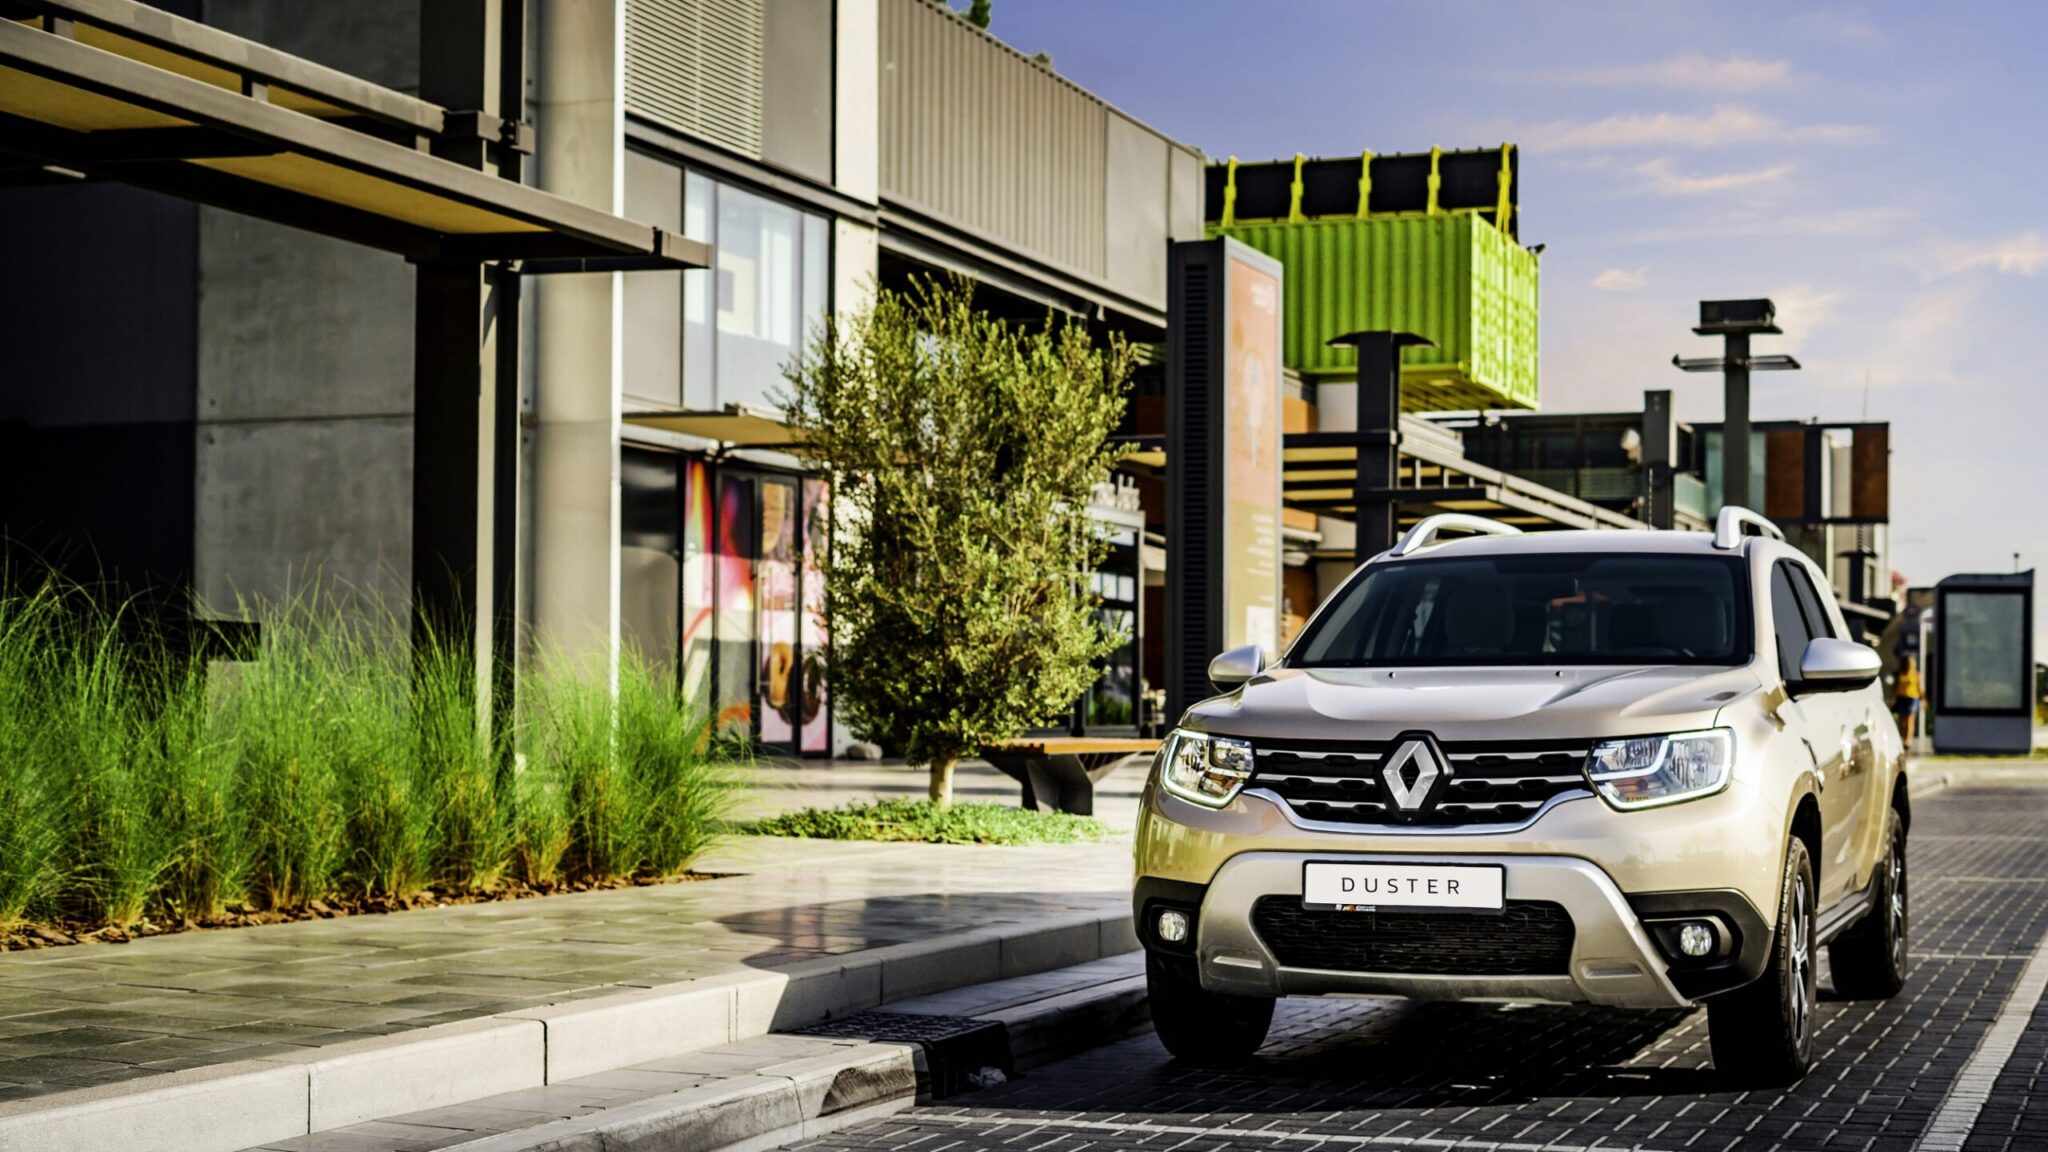 meet,safety,renault,duster,road